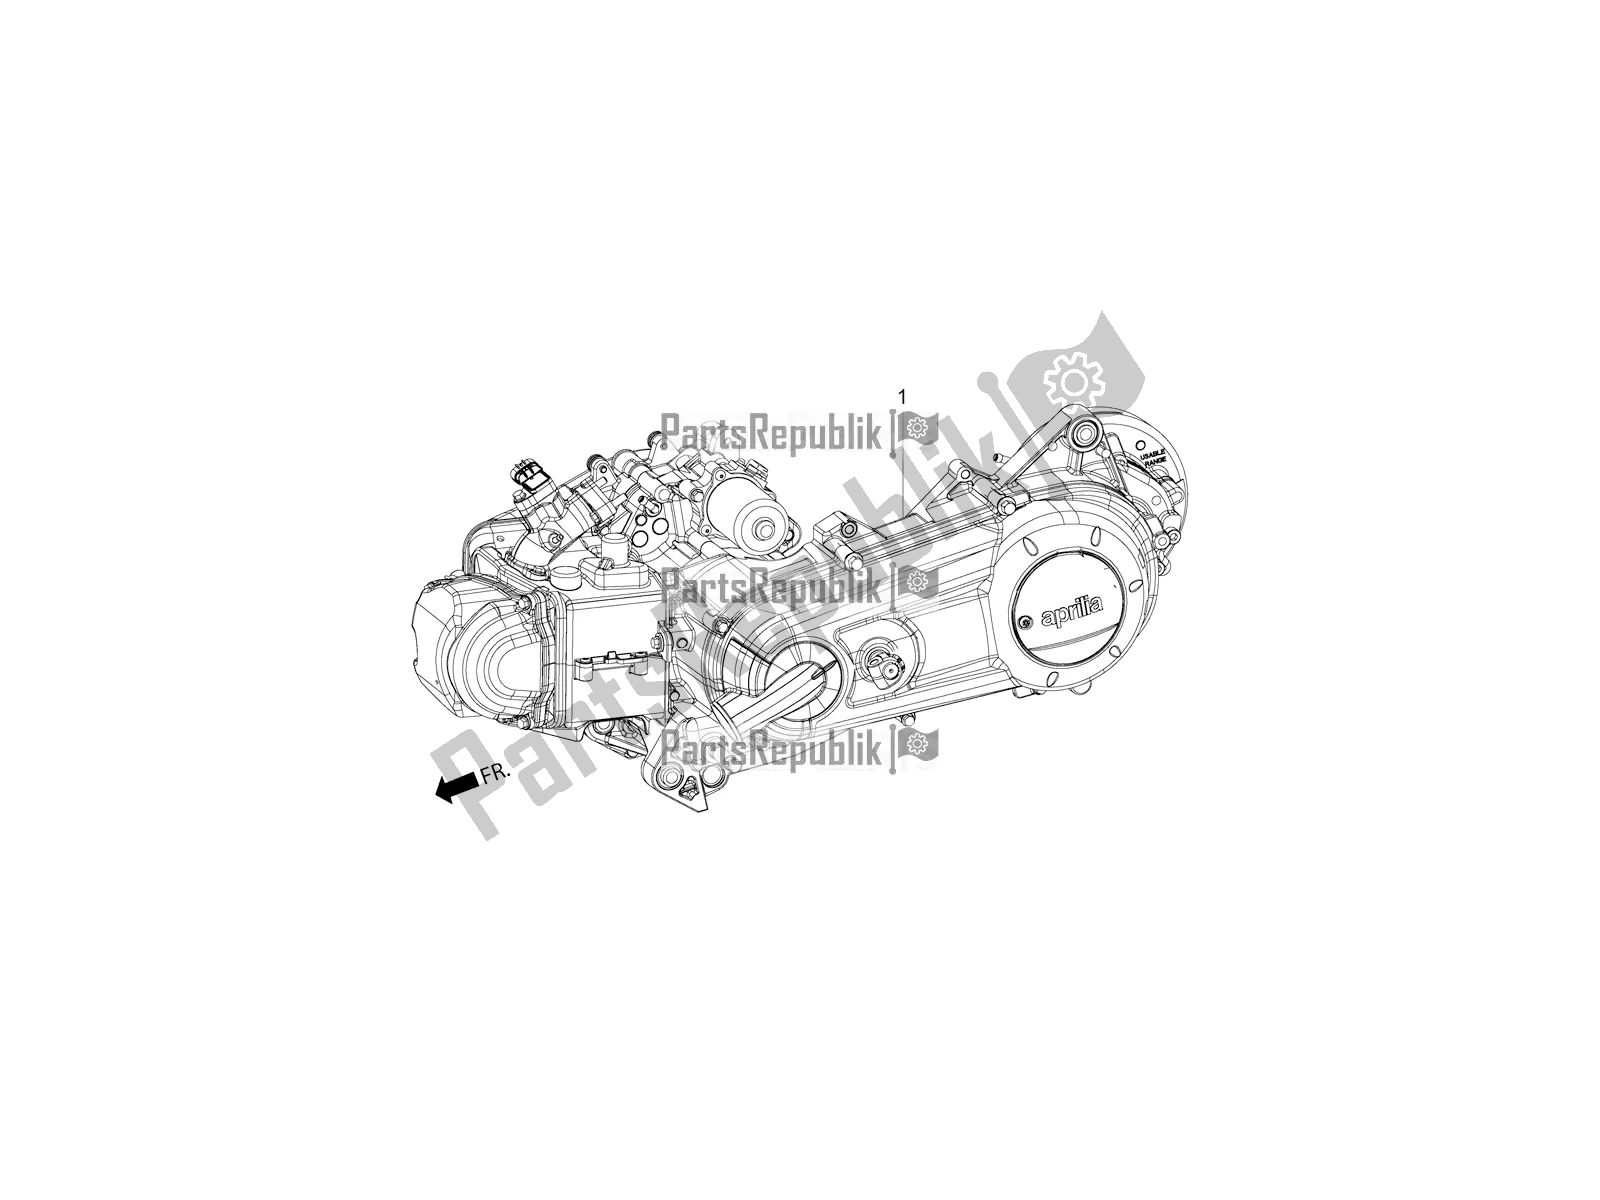 All parts for the Complete Engine of the Aprilia SR 150 4 T/3V 2020